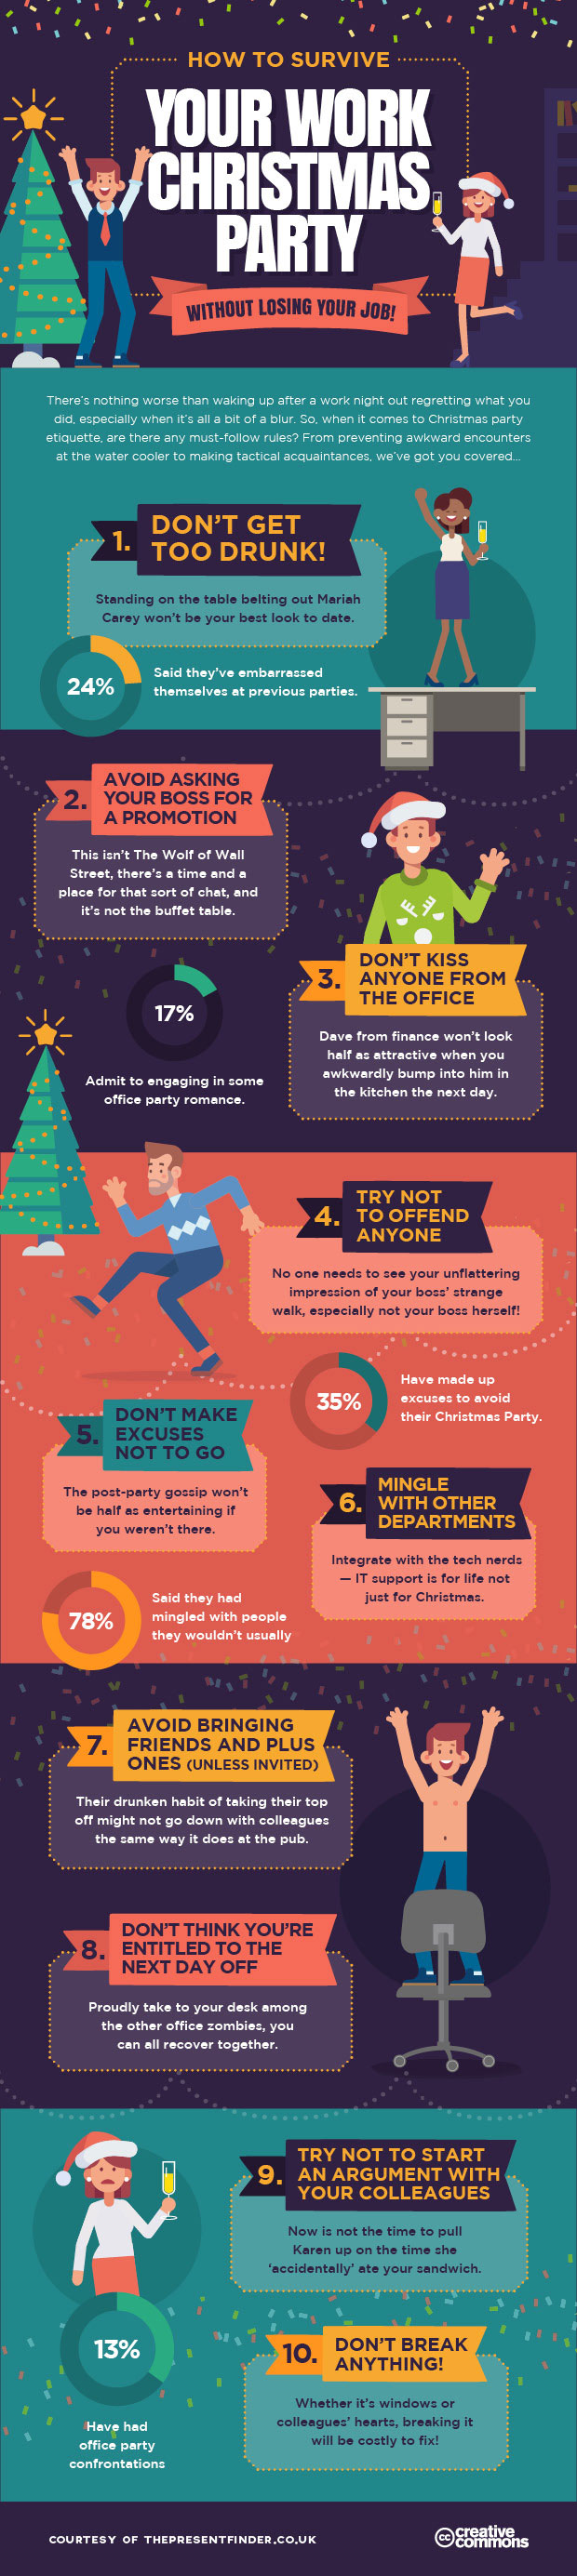 Christmas party infographic